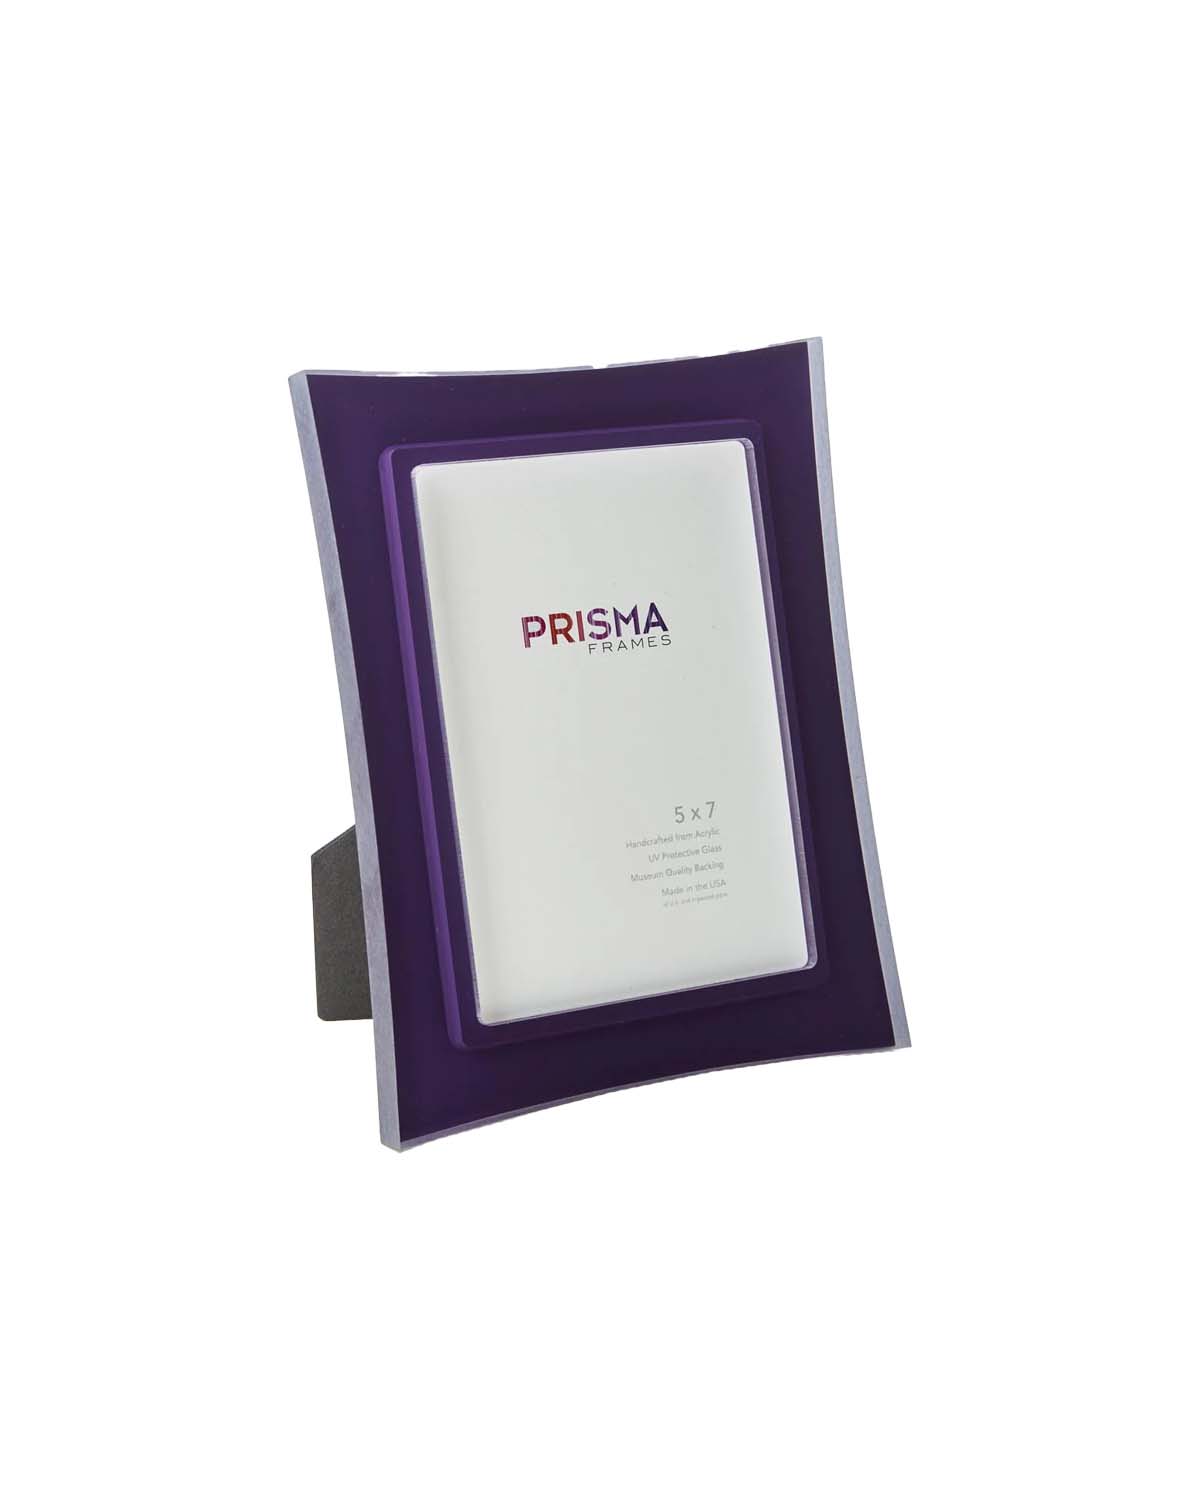 Risa Eggplant Purple frame with flared edges, side view